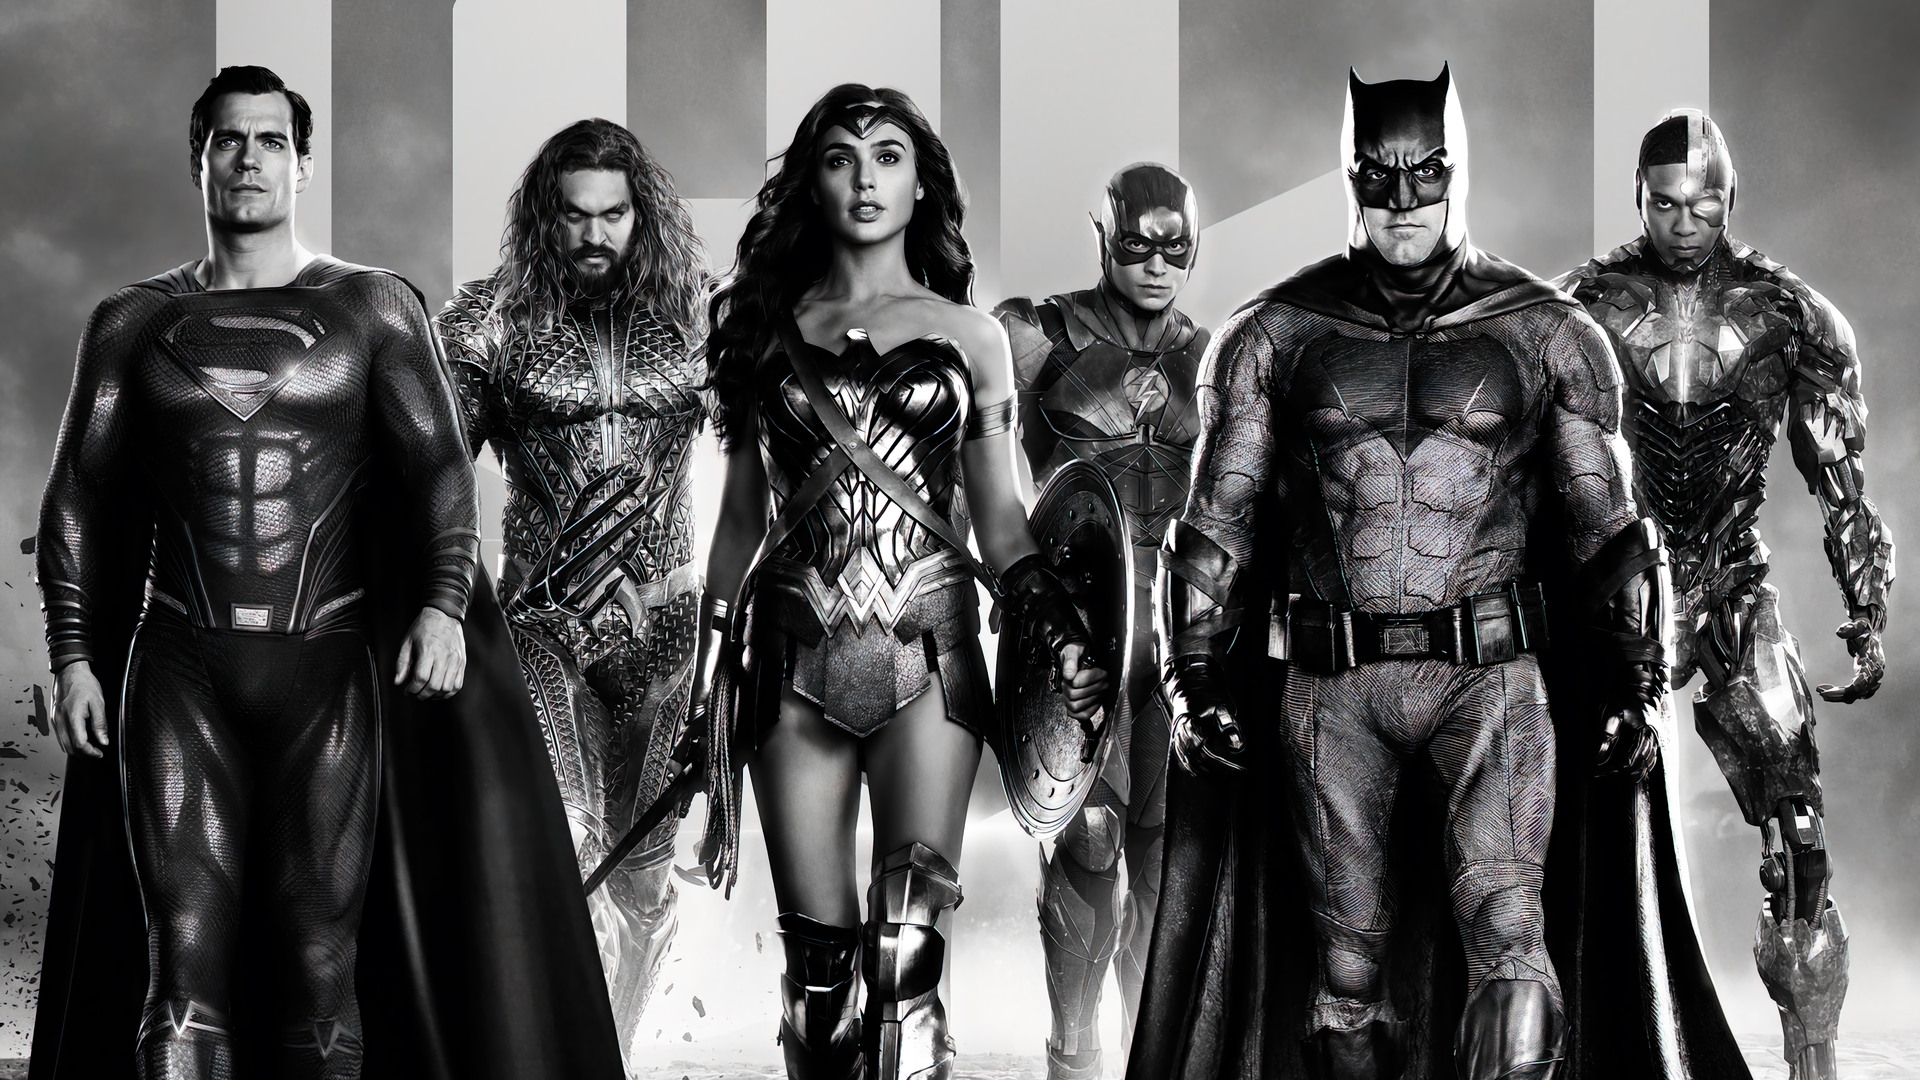 Justice League 2021 HBO Max Zack Snyder Wallpaper 4K 63118 1920x1080